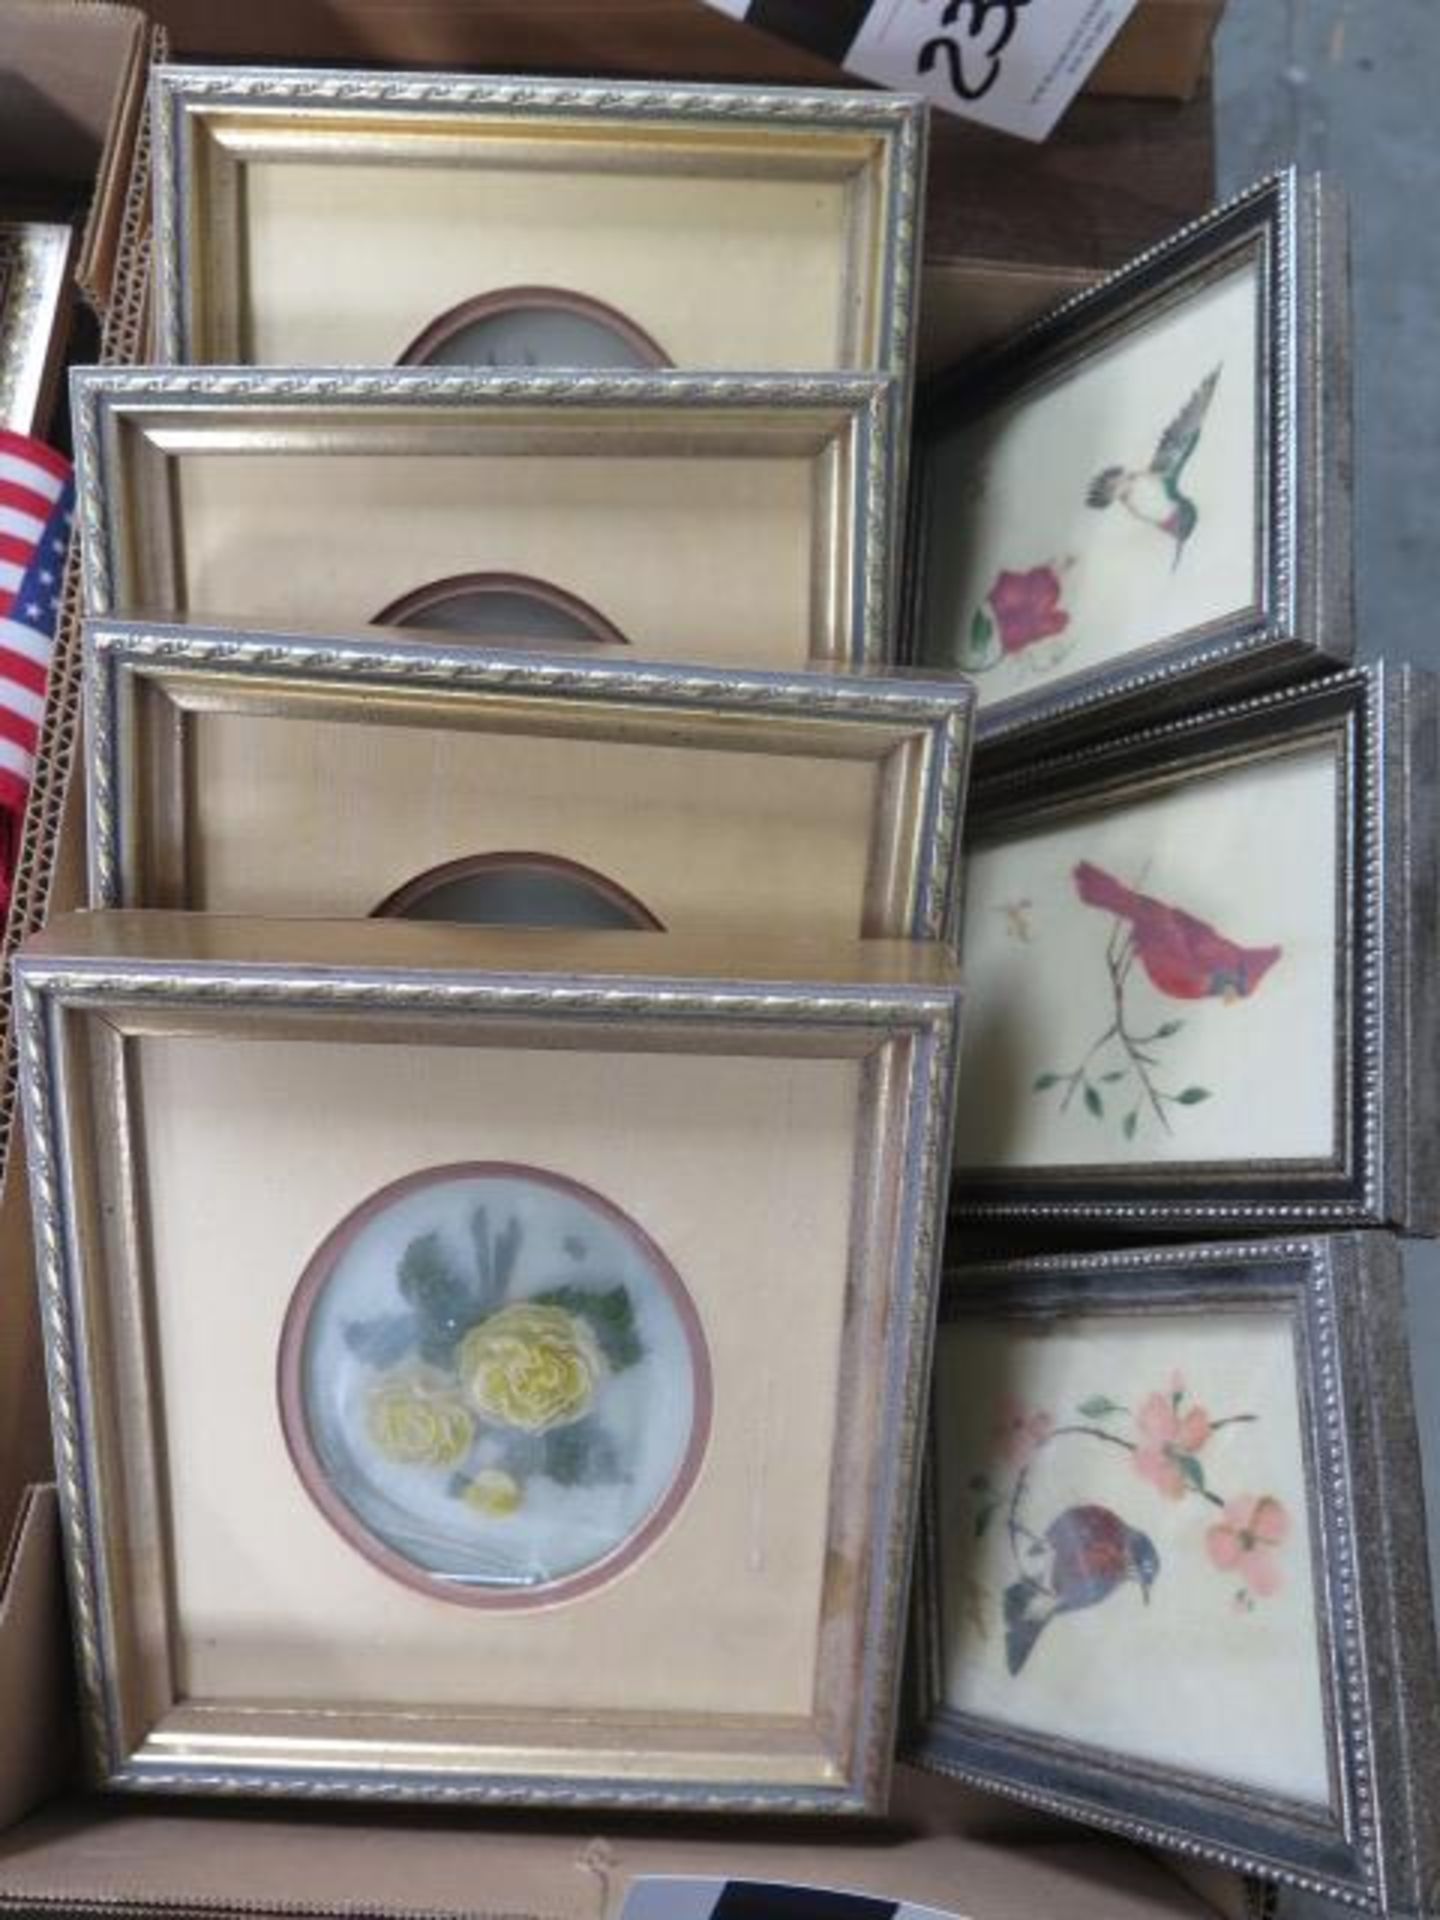 Franklin Mint Flower Pictures and Bird Pictures (SOLD AS-IS - NO WARRANTY) - Image 2 of 5